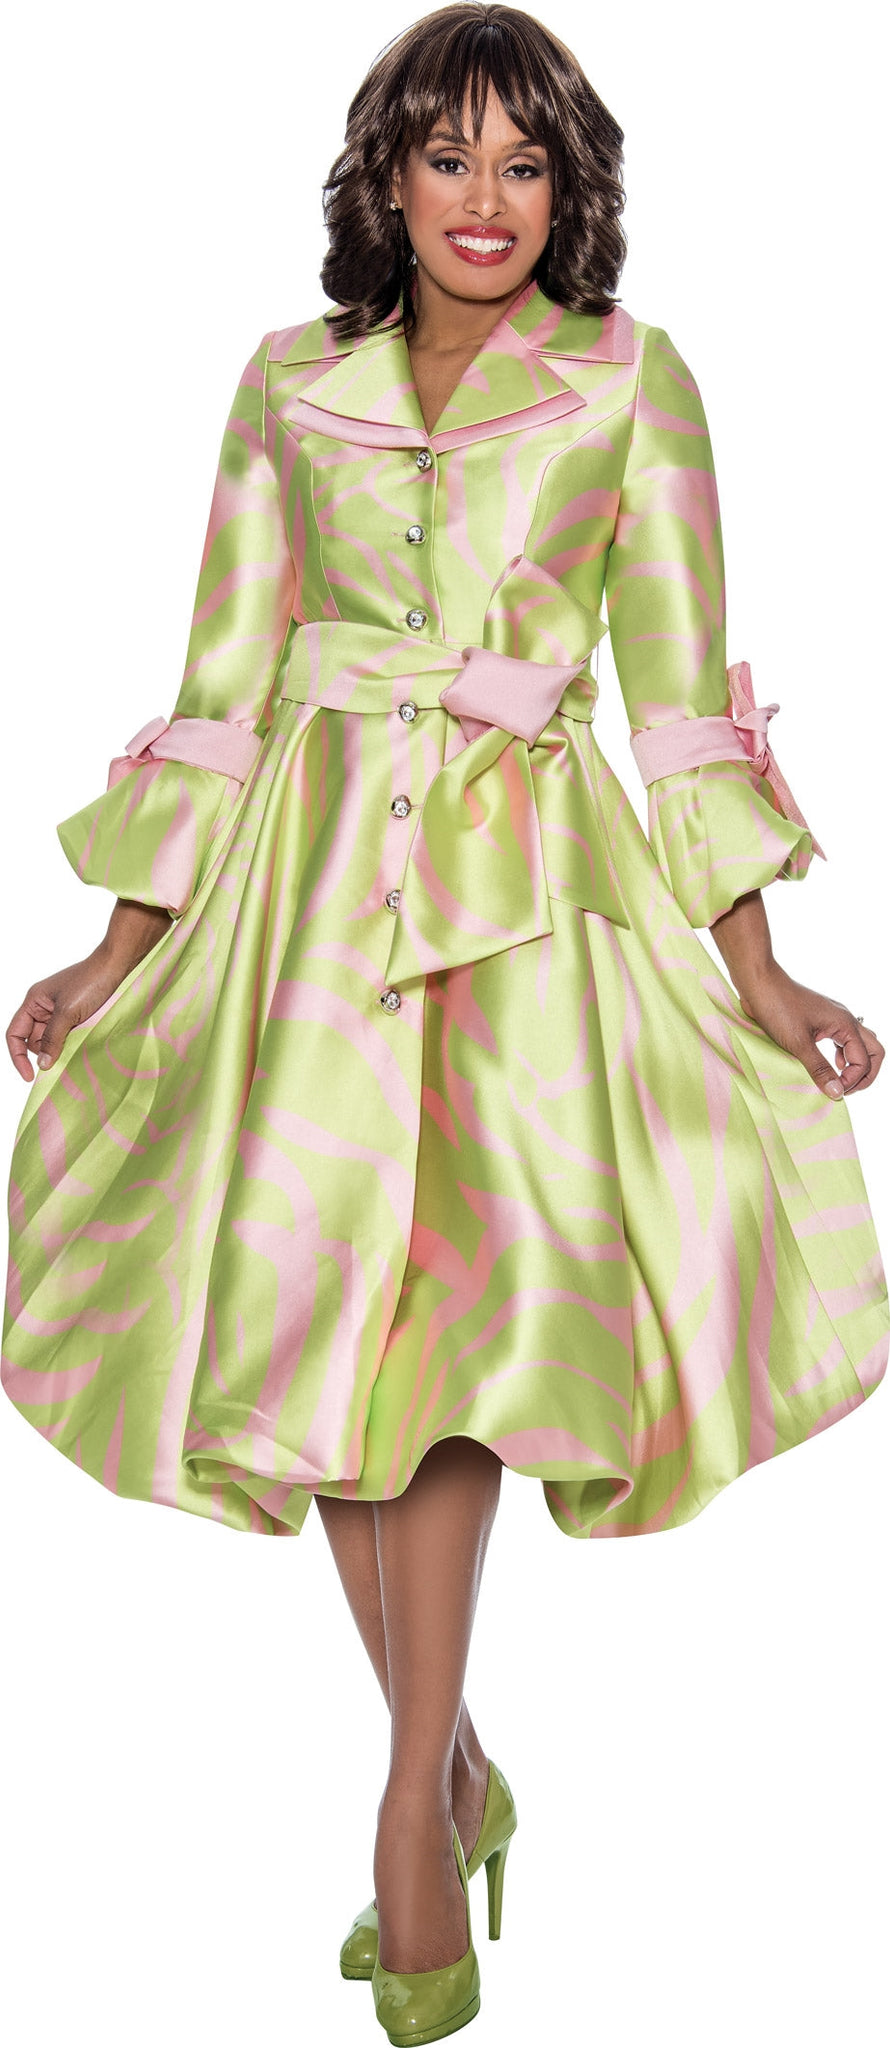 Church Dress By Nubiano 1771C-Pink/Lime - Church Suits For Less